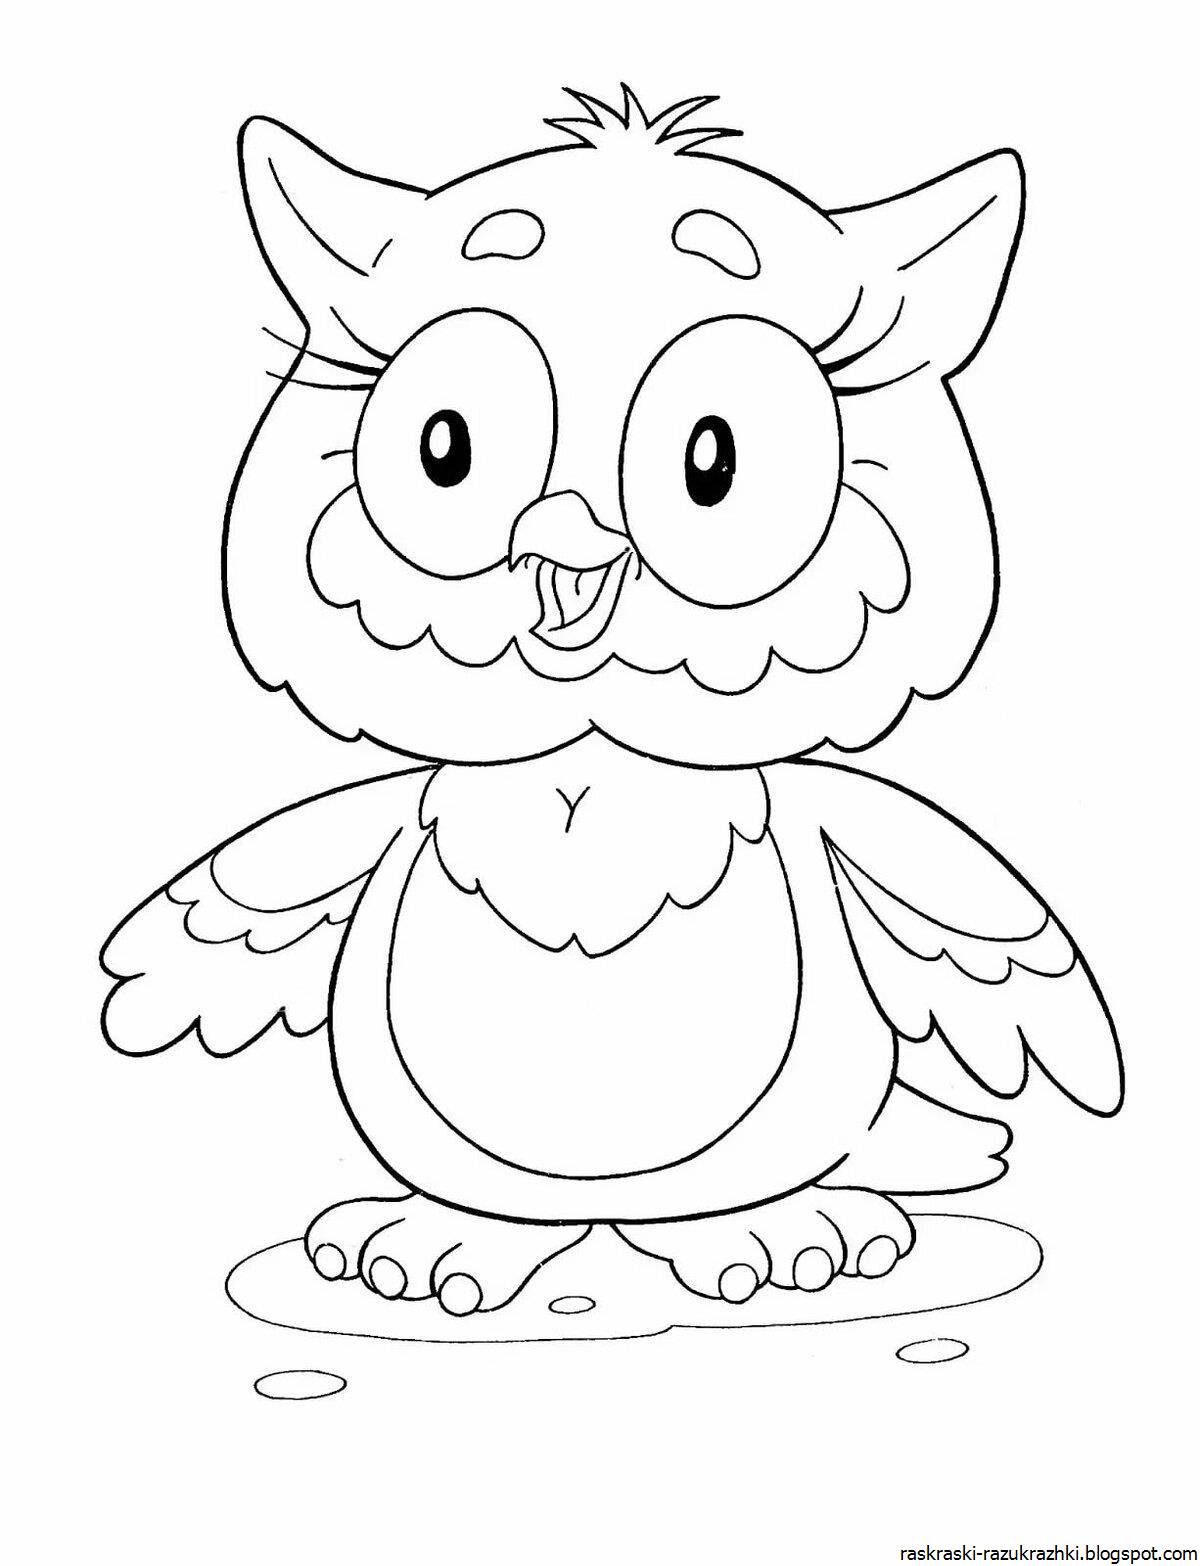 Colorful animal coloring pages for children 3-4 years old